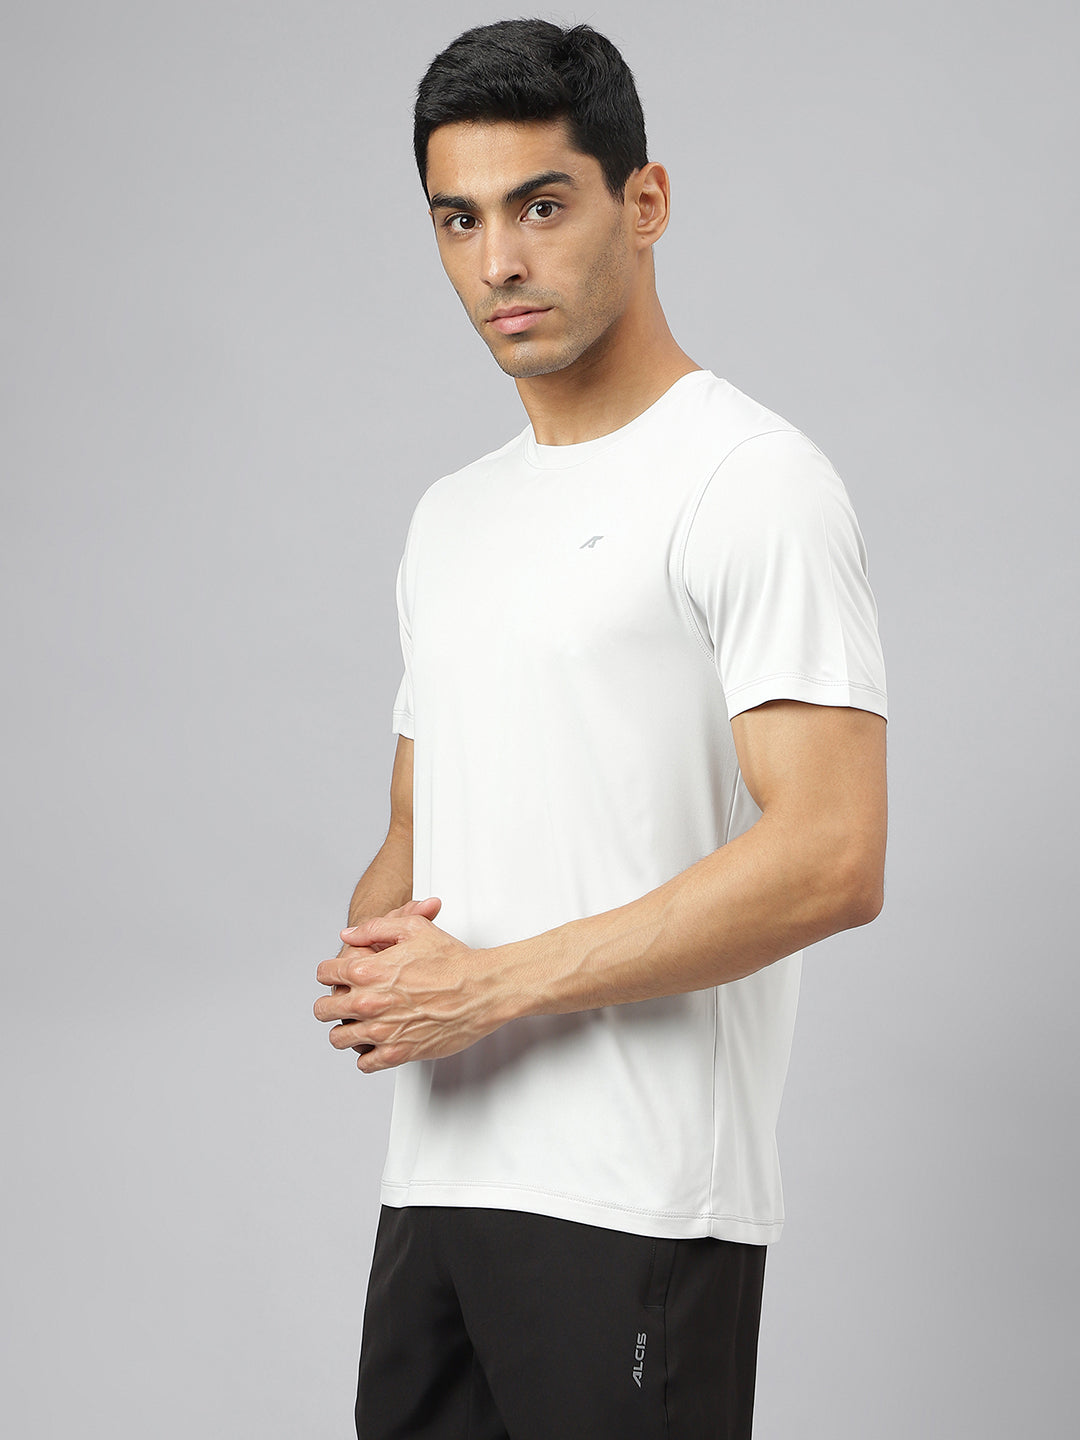 Alcis Men Light Grey Anti-Static Soft-Touch Slim-Fit Sports for All Round Neck Wonder T-Shirt